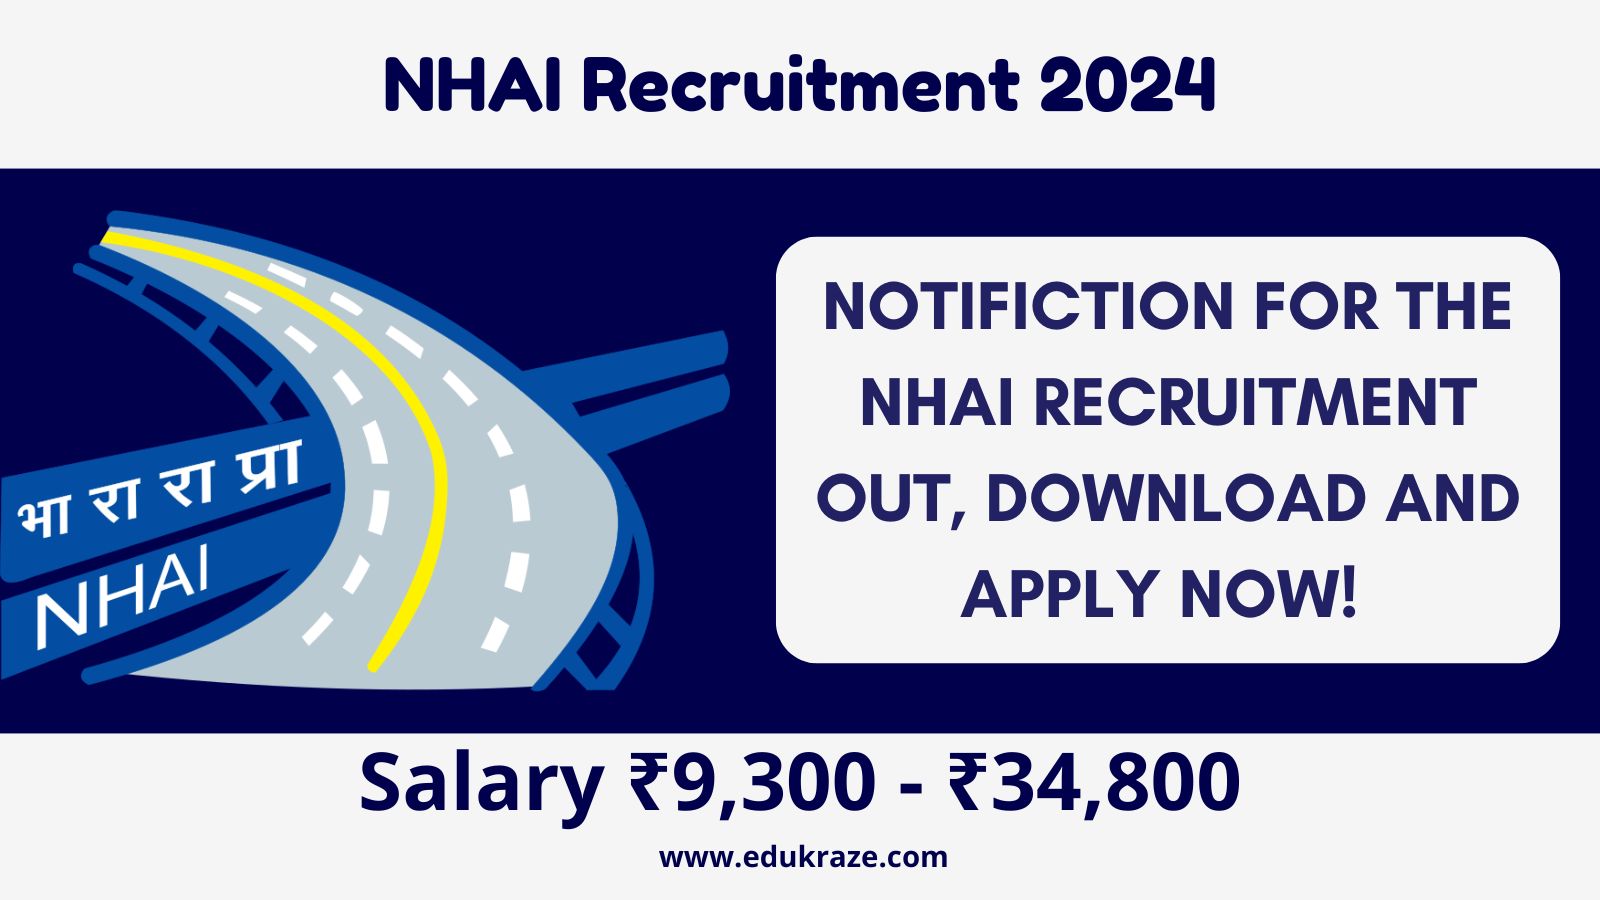 NHAI Recruitment Out, Salary Up to ₹34,800